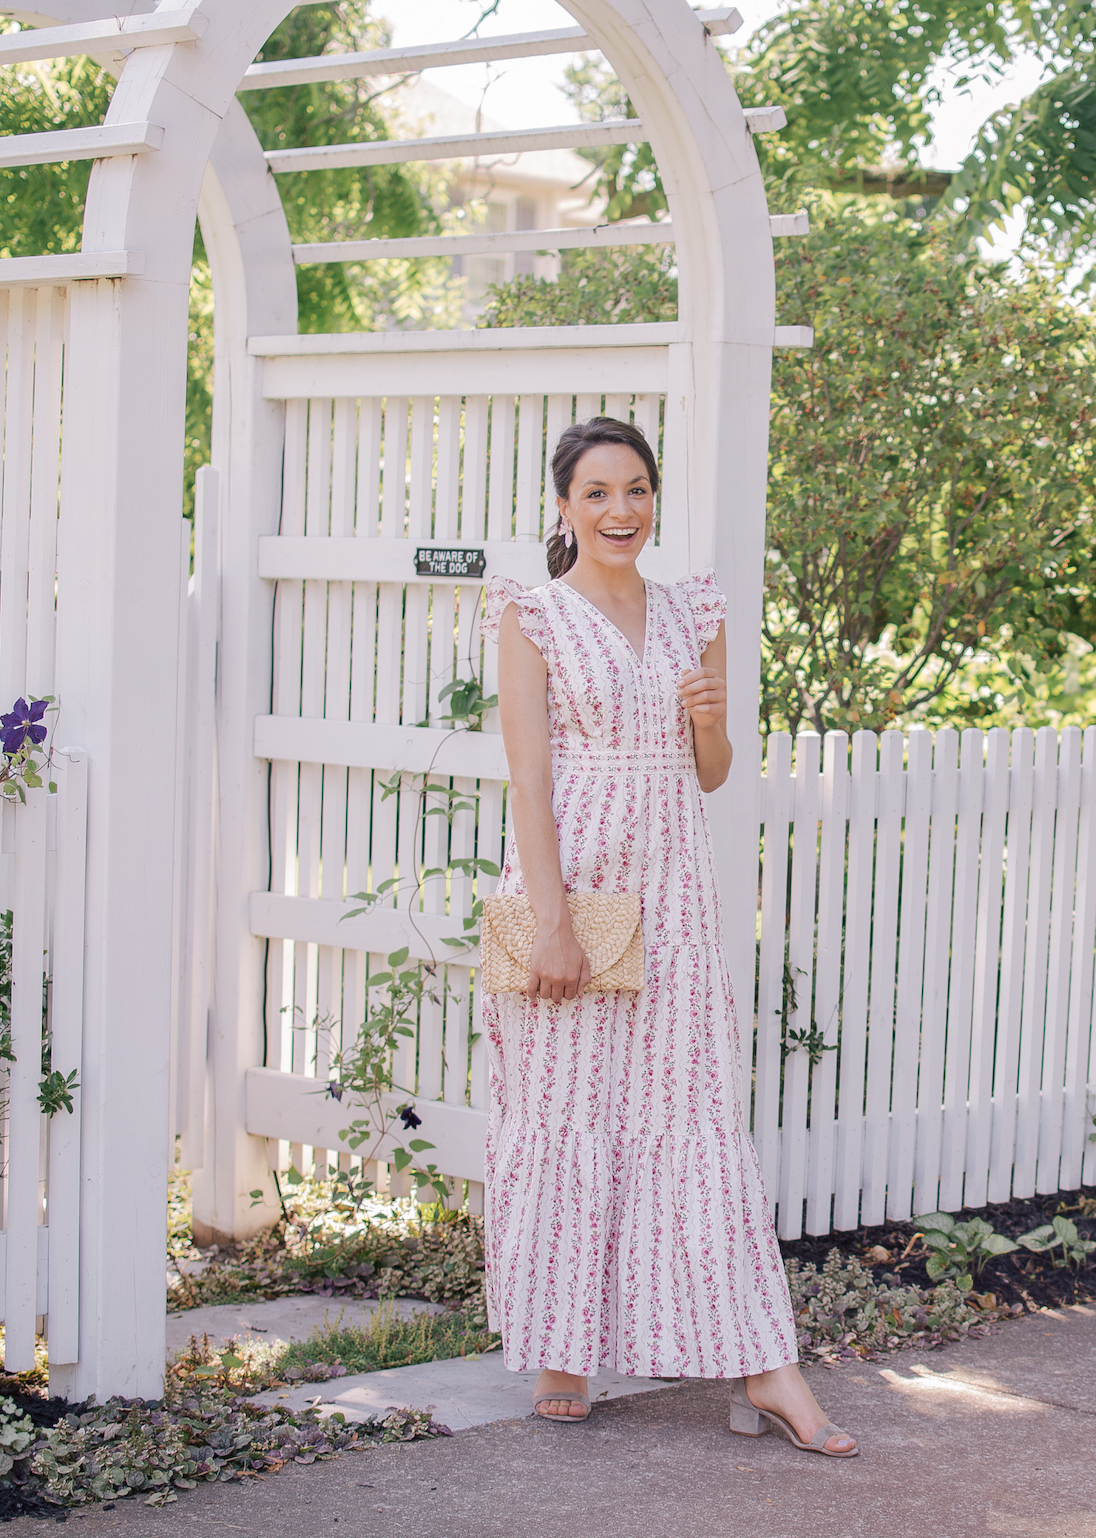 Beautiful Maxi Dresses For Summer | The Pink Brunette